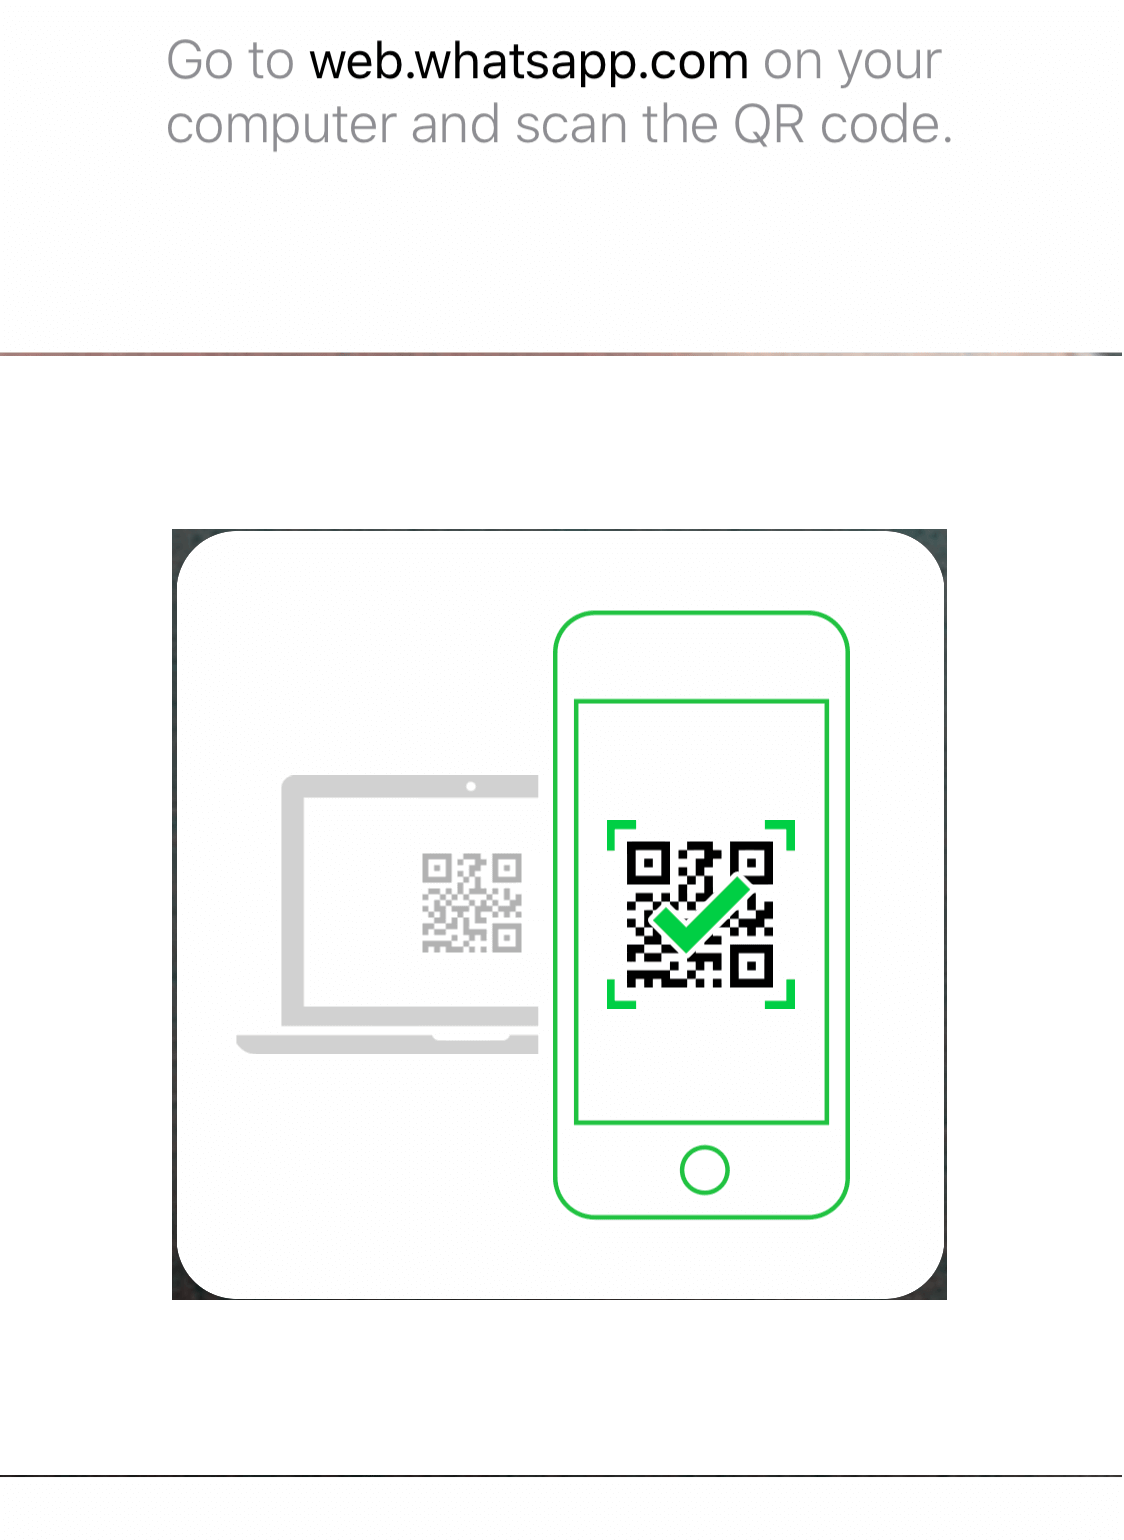 Scan the QR Code using your phone and WhatsApp Web will open up